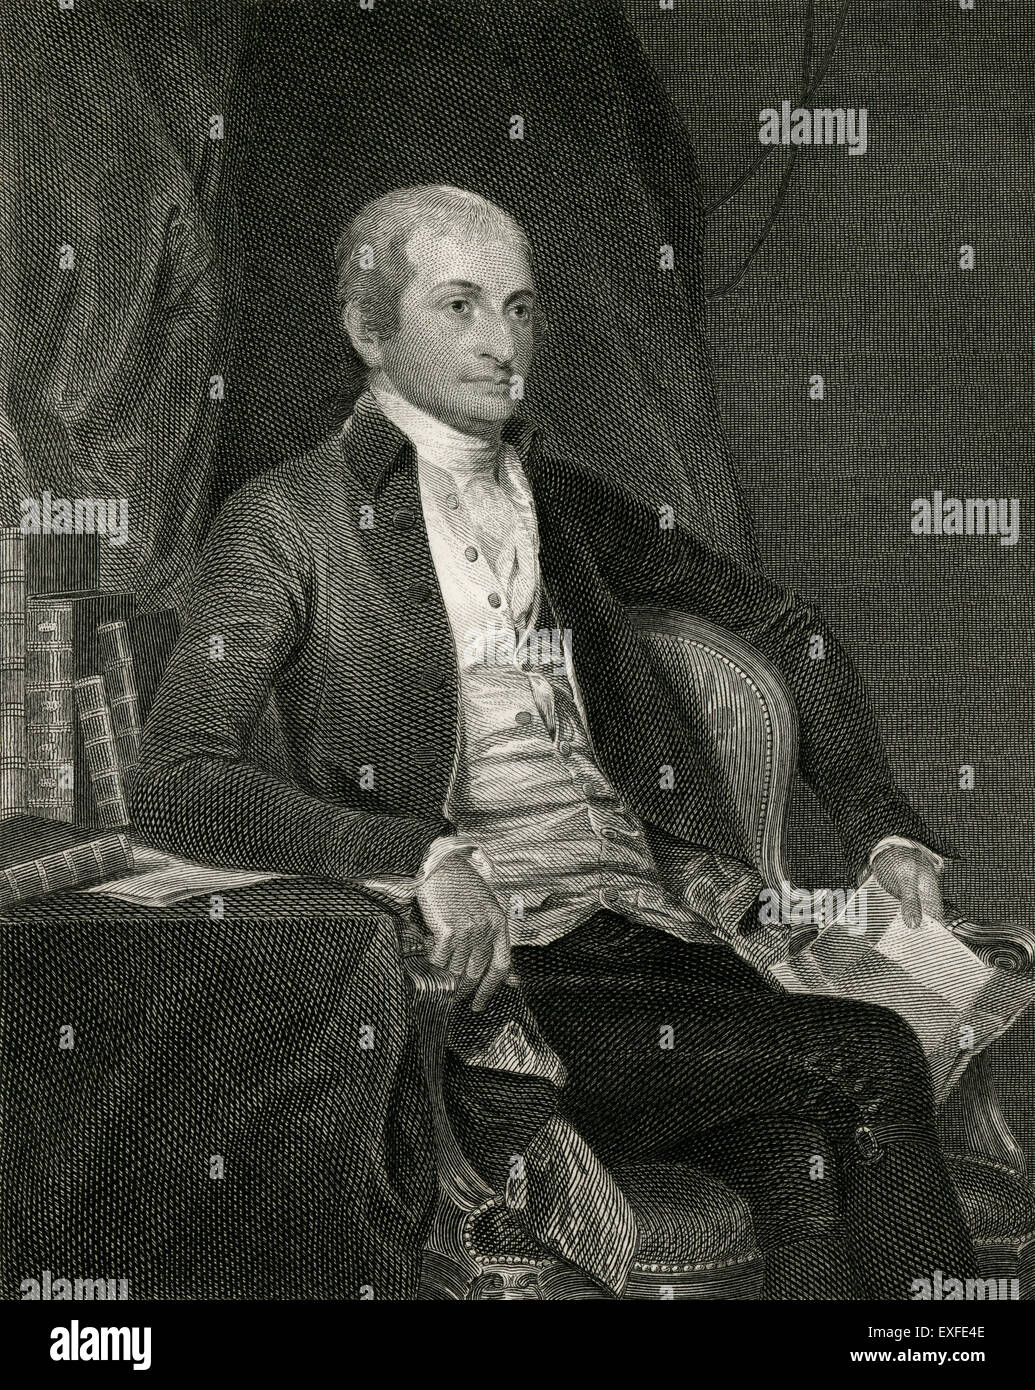 Antique c1860 engraving, John Jay. John Jay (1745-1829) was an American statesman, Patriot, diplomat, one of the Founding Fathers of the United States, signer of the Treaty of Paris, and first Chief Justice of the United States (1789Ð95). Stock Photo